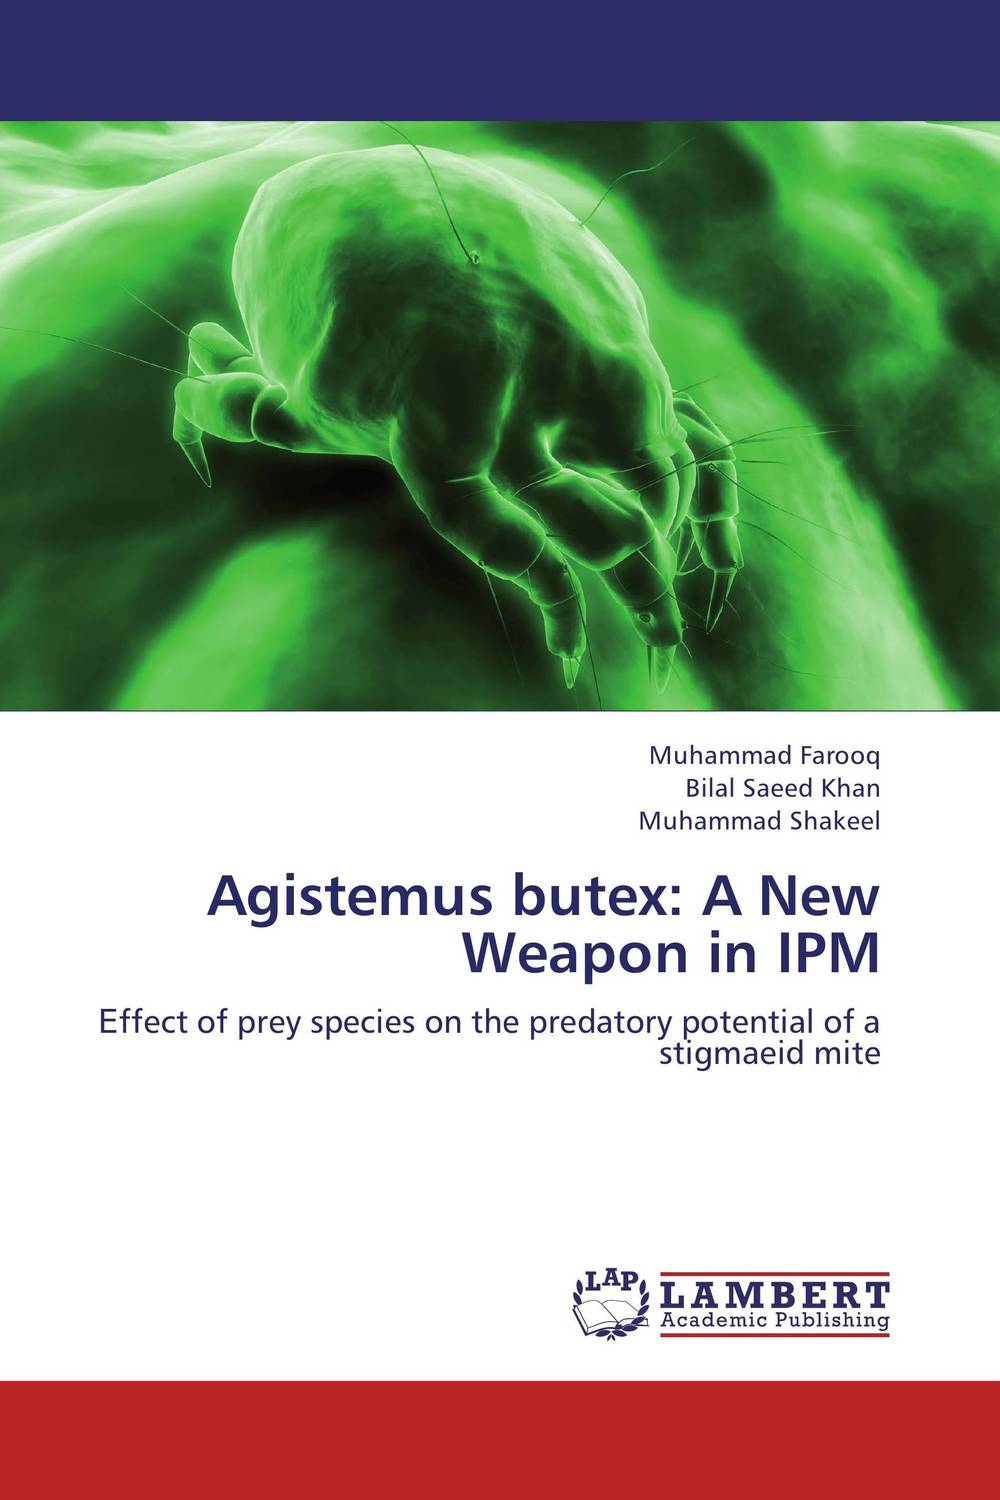 Agistemus butex: A New Weapon in IPM